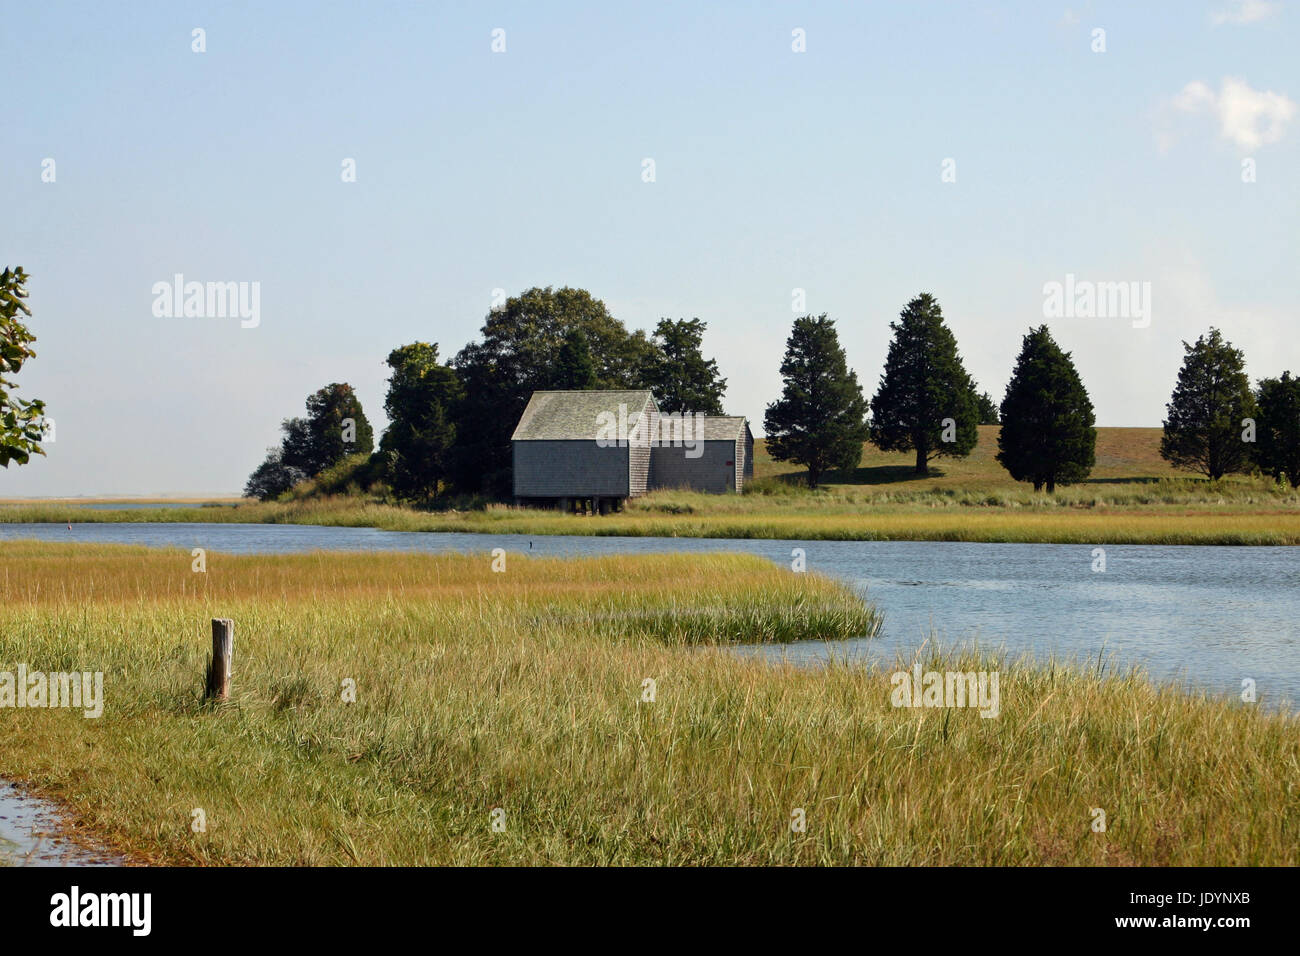 A weathered, gray-shingled shack on Salt Pond at the Cape Cod National Seashore, Eastham, Massachusetts, viewed from a nature trail Stock Photo